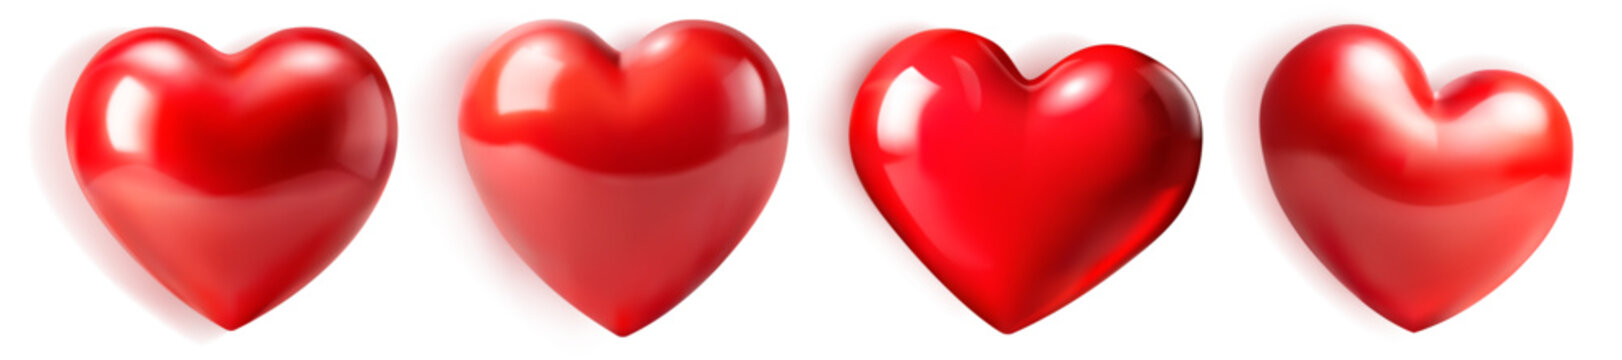 Set of beautiful red hearts with glares and shadows on white background